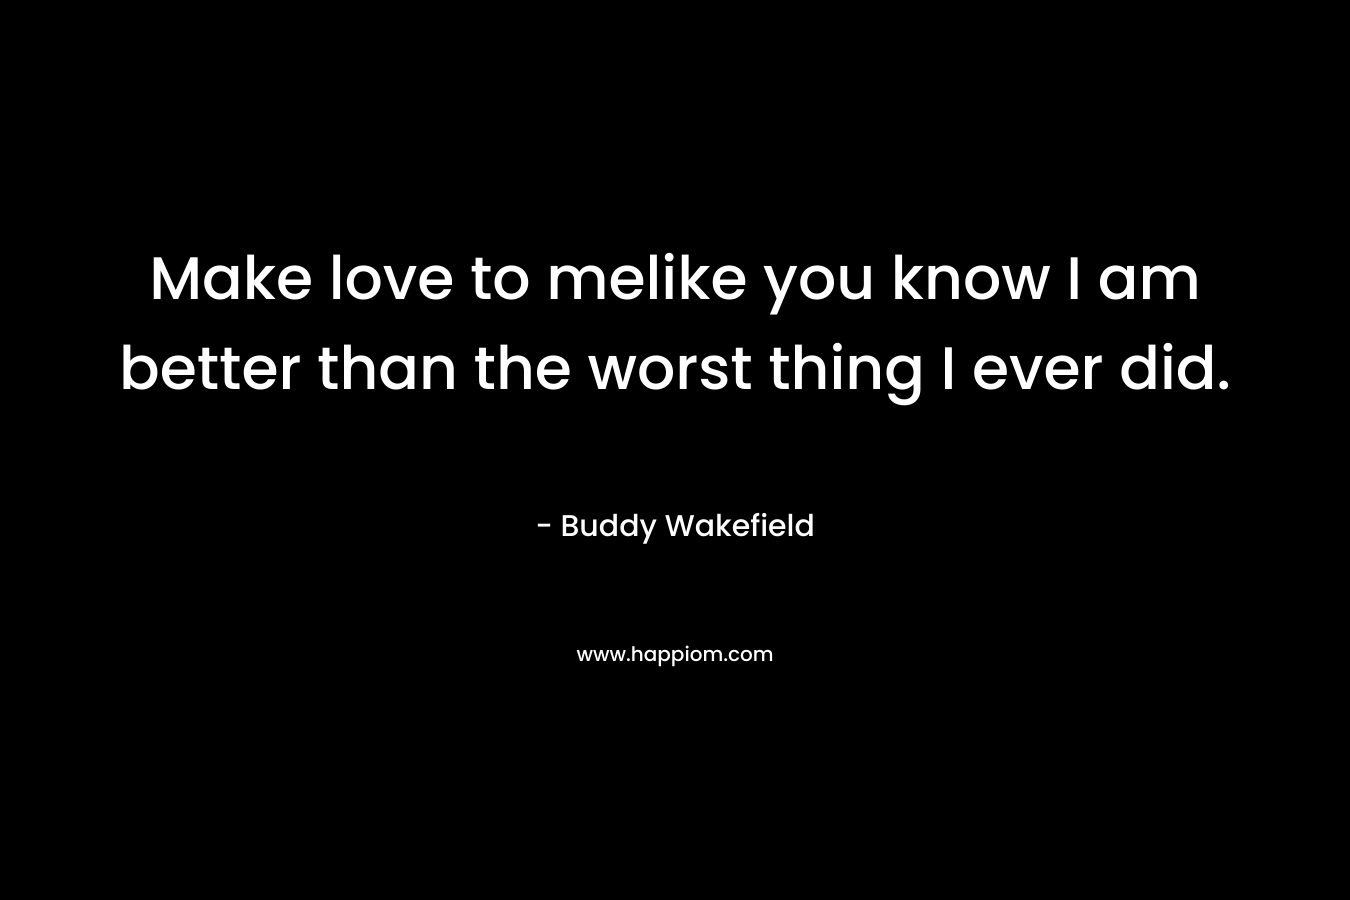 Make love to melike you know I am better than the worst thing I ever did. – Buddy Wakefield